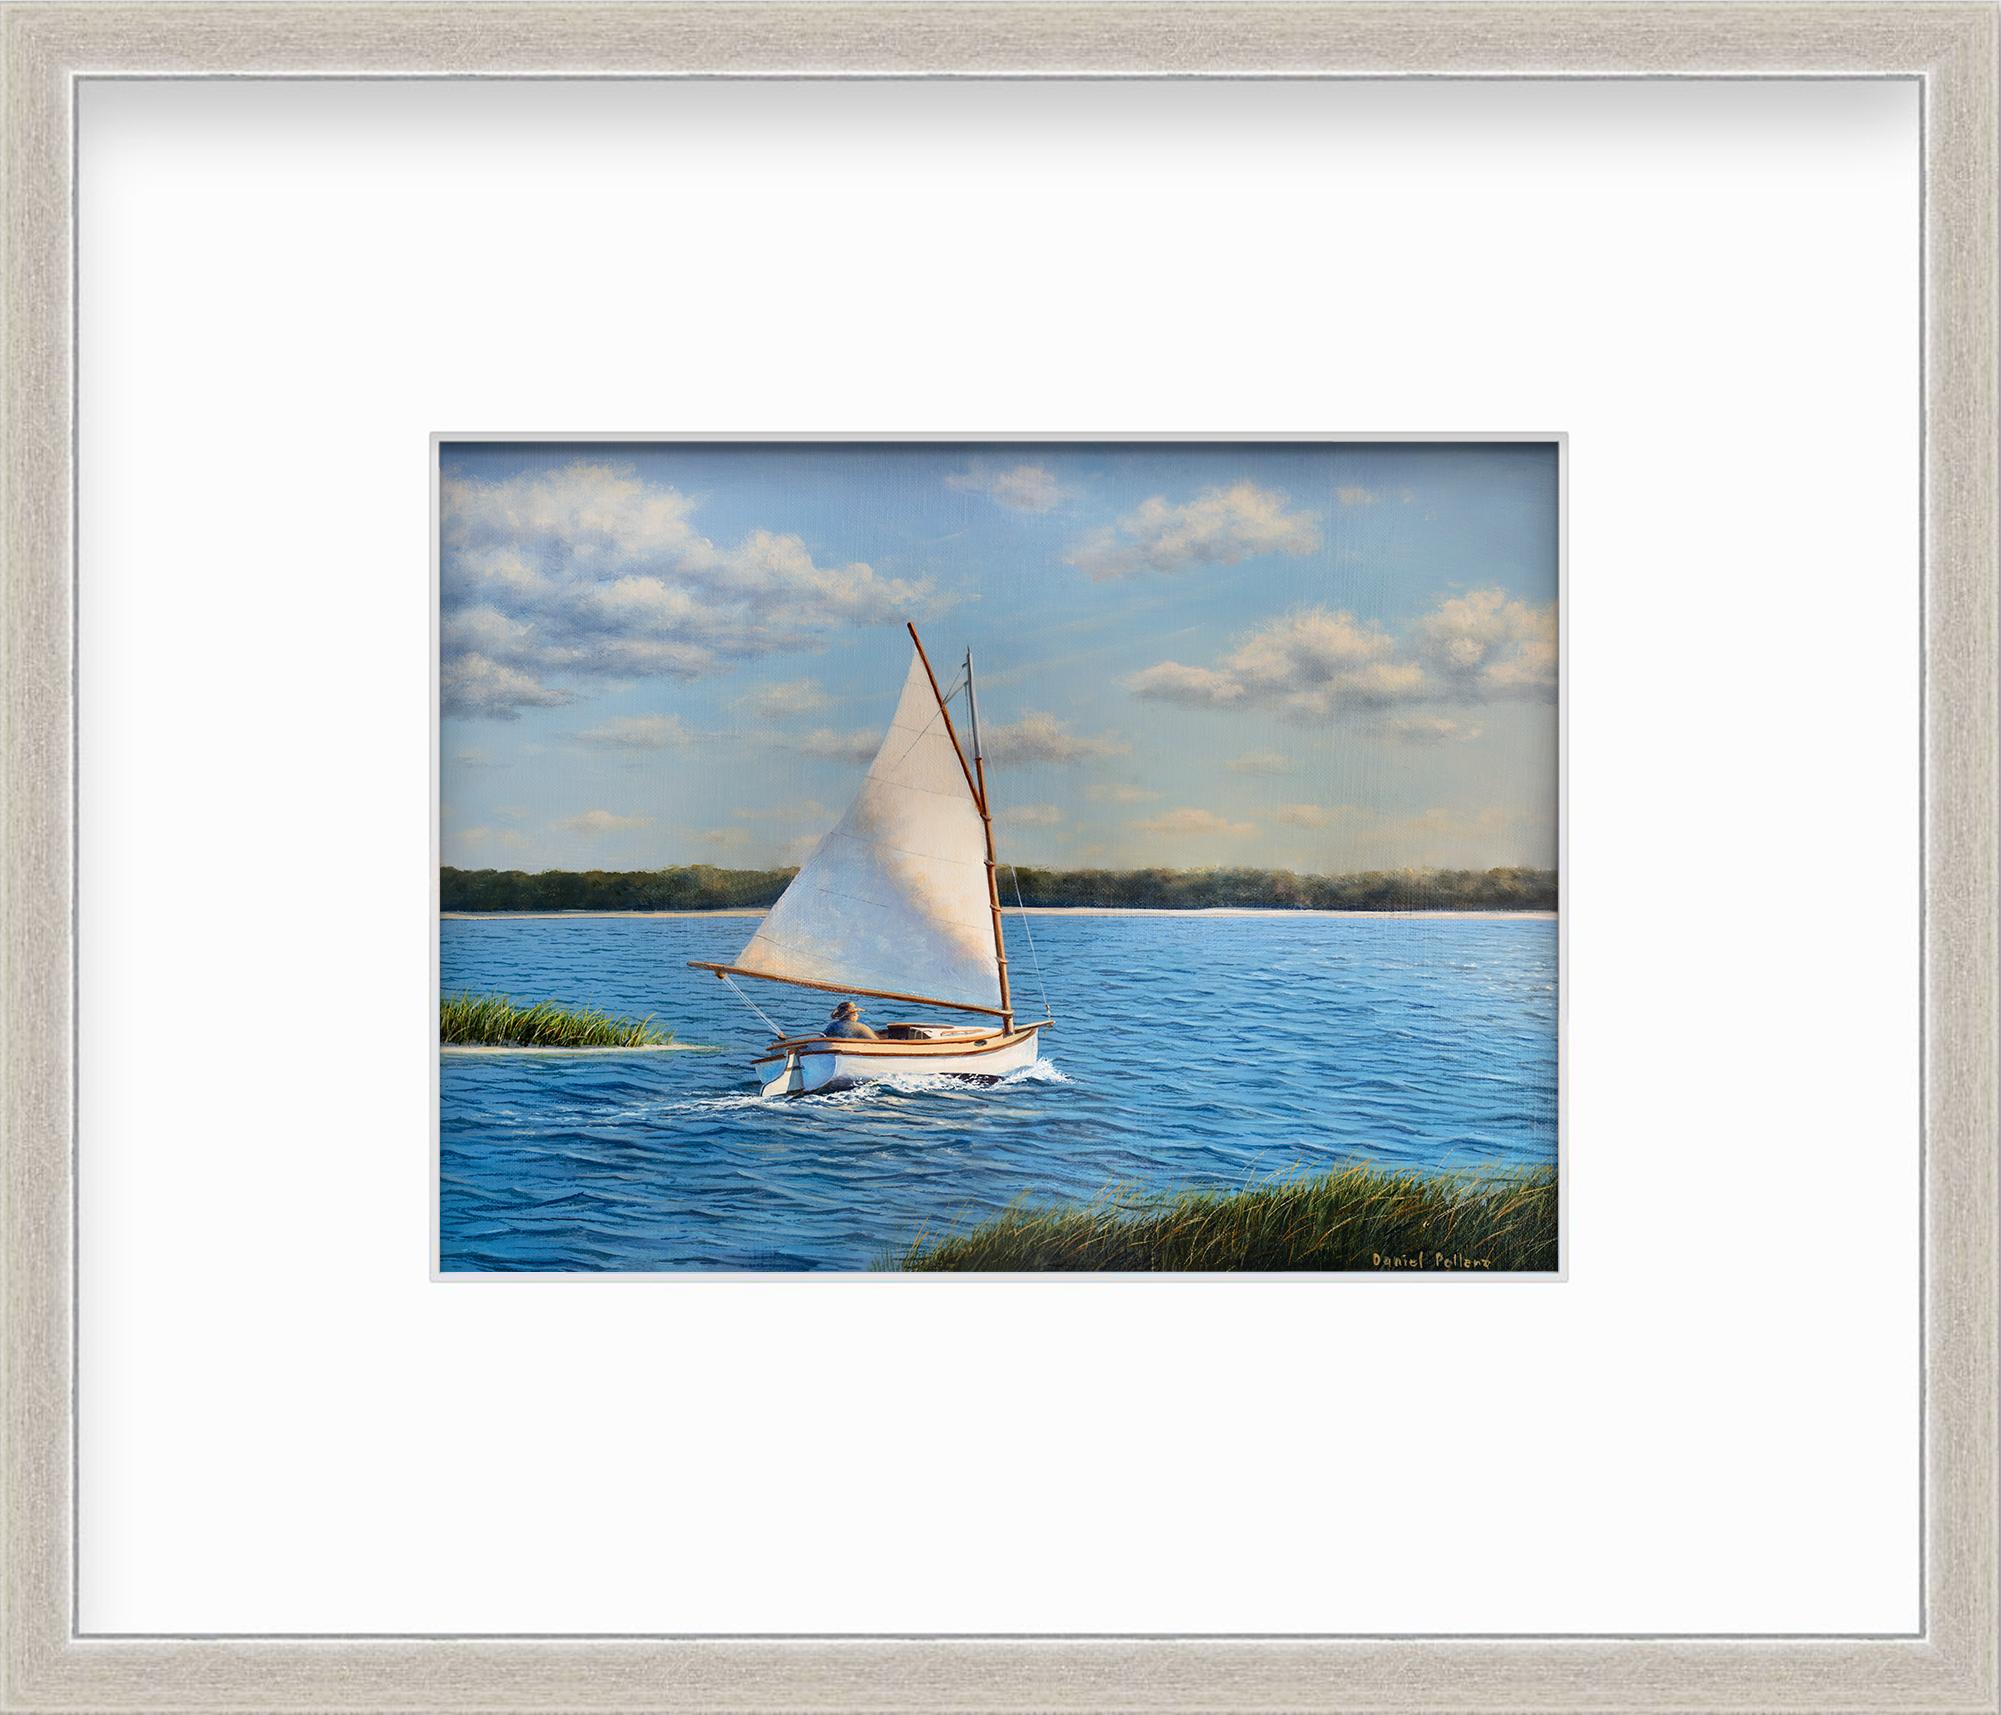 ""Sailing Out to the Bay", gerahmter Druck in limitierter Auflage, 6 Zoll x 9 Zoll"